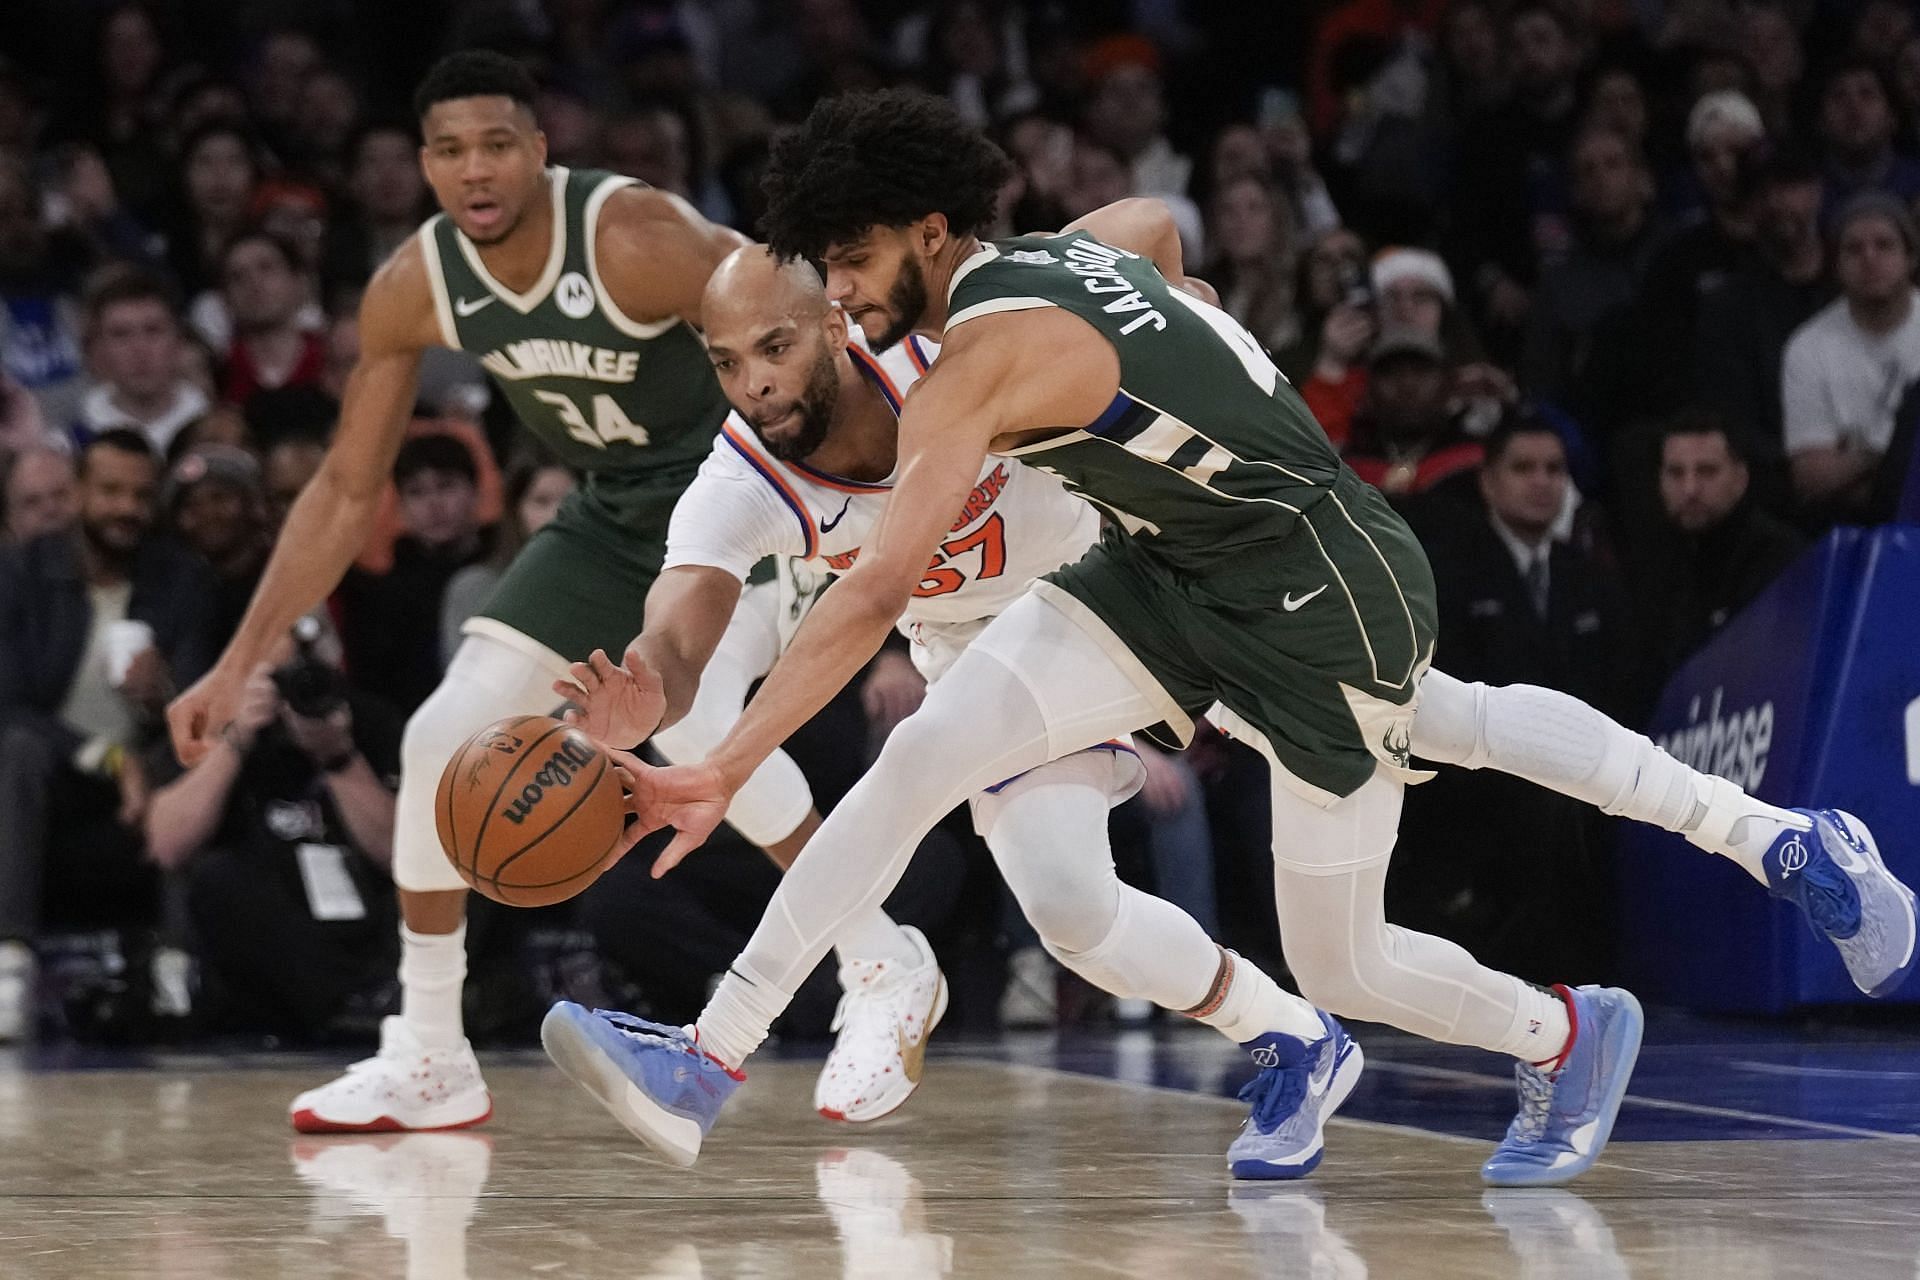 Taj Gibson gave the New York Knicks a boost against the Milwaukee Bucks with his defense, hustle and rebounding.